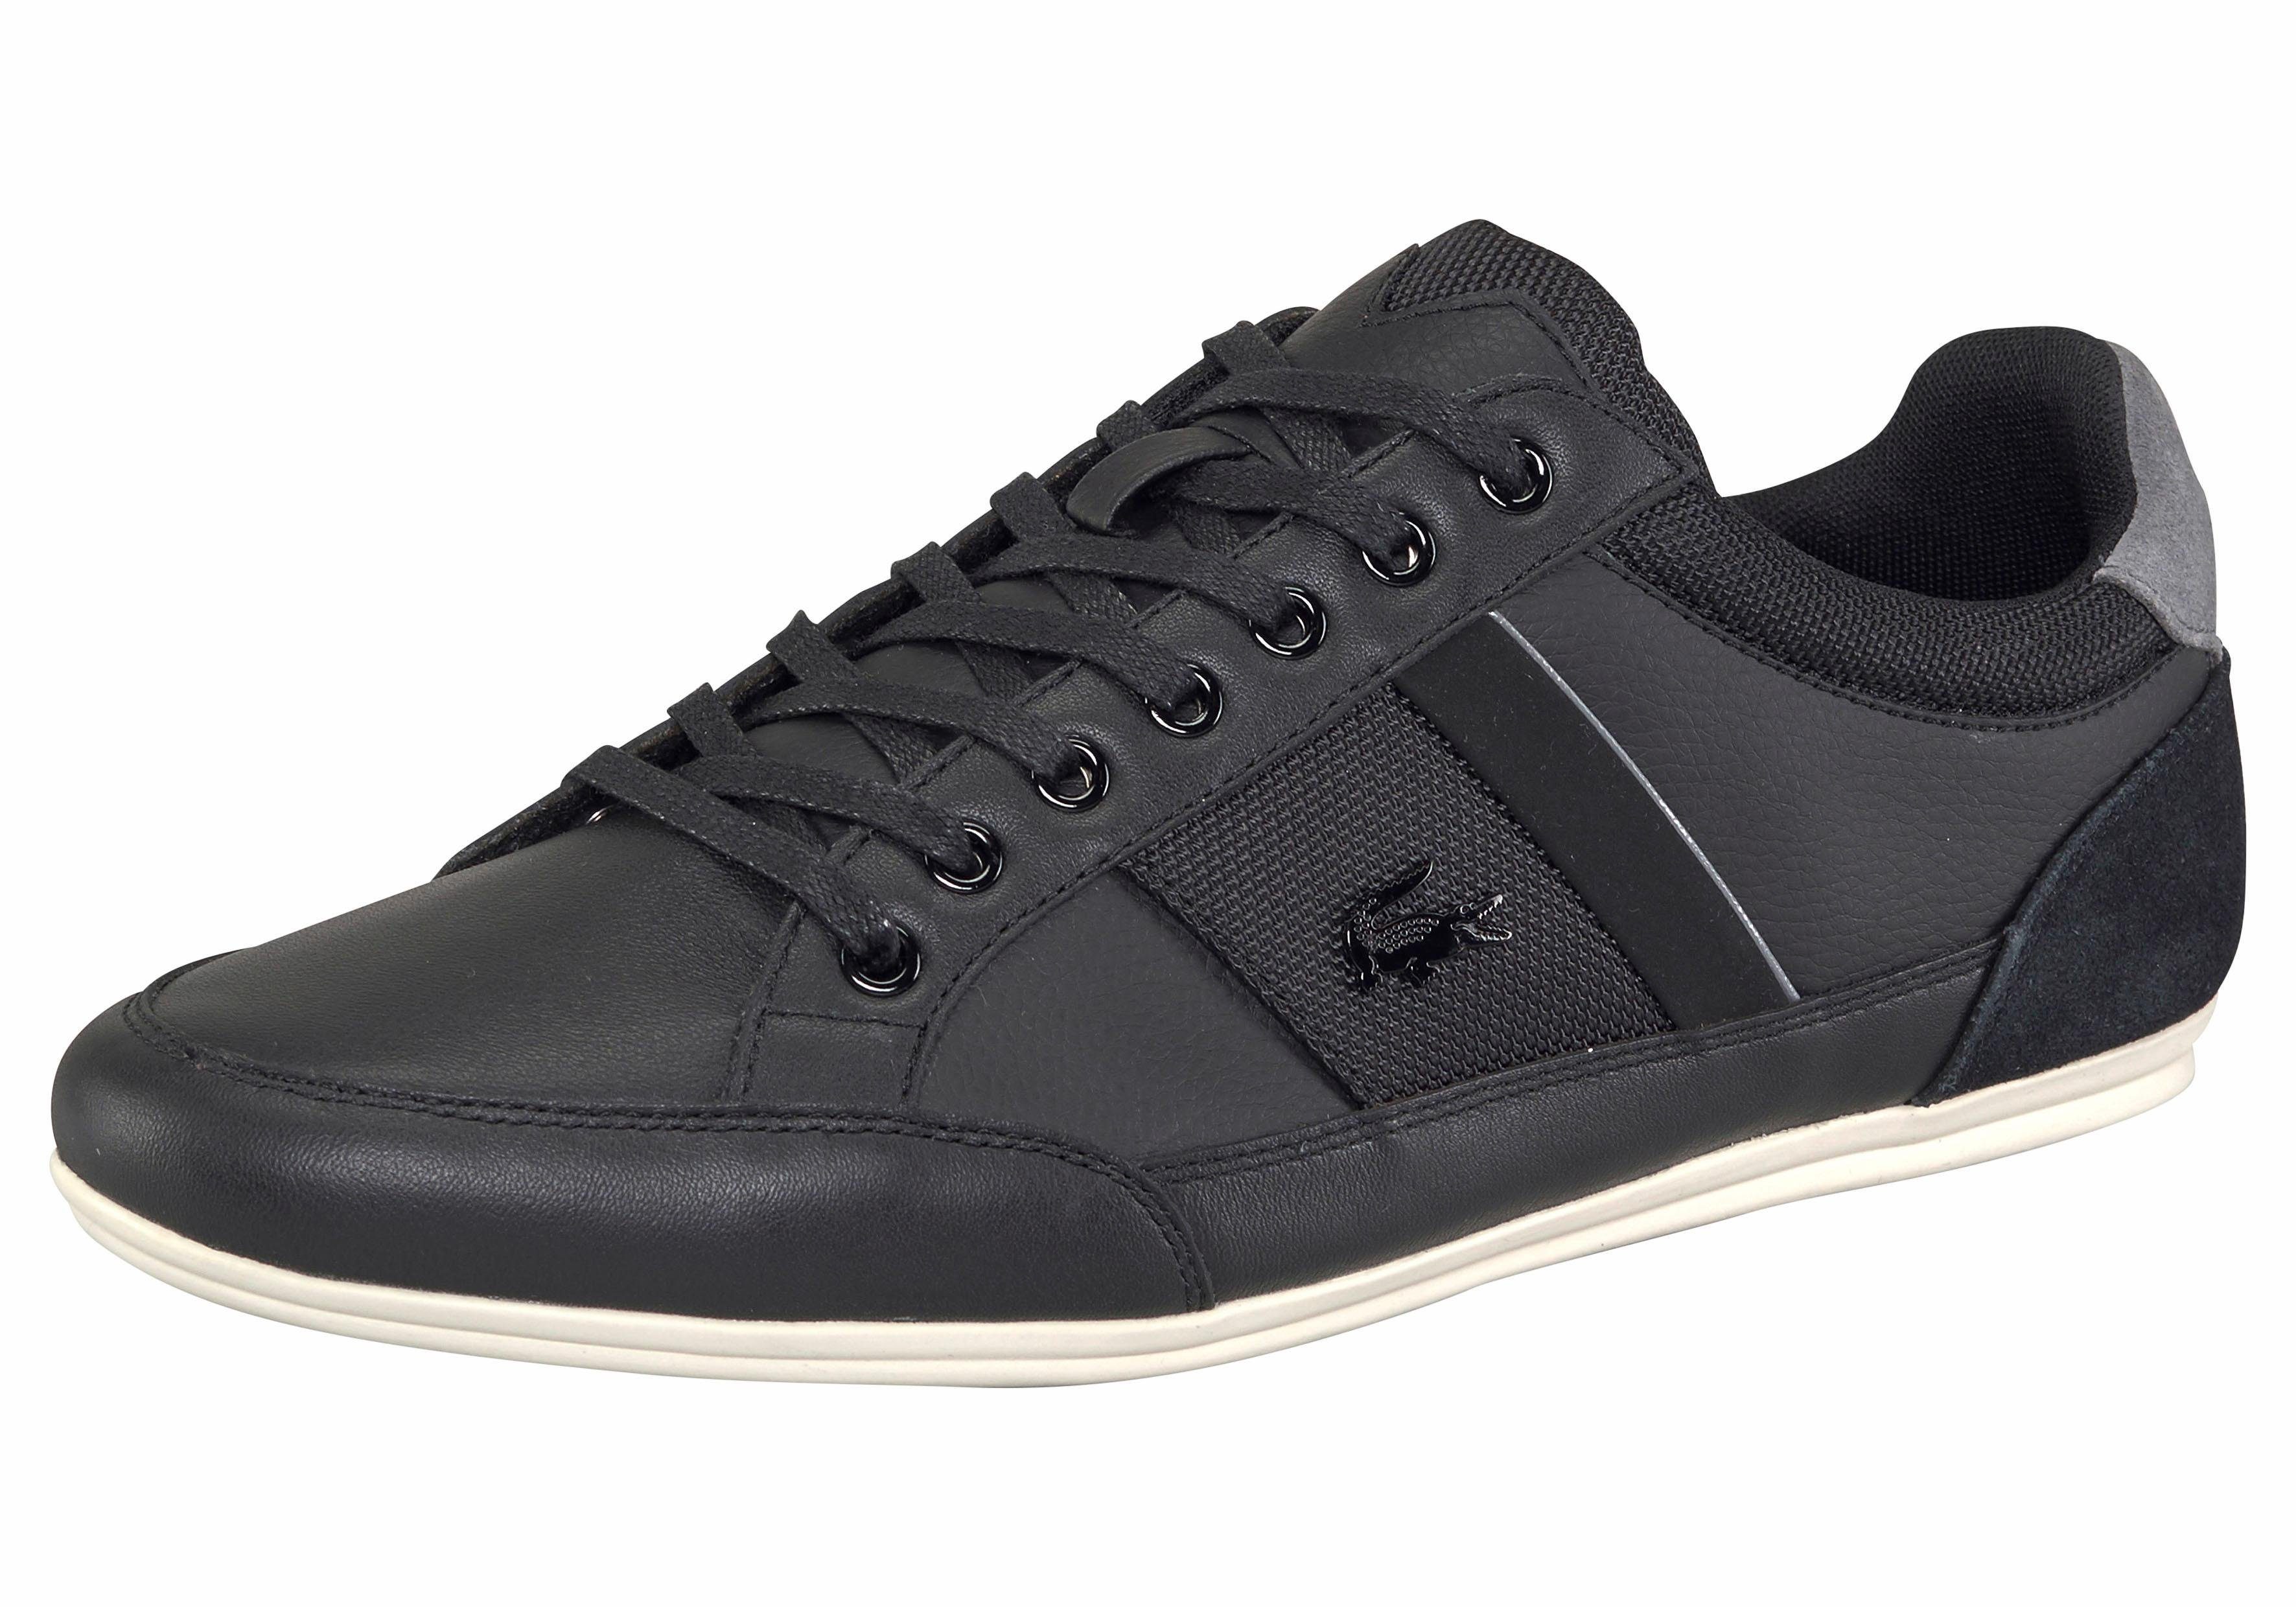 Otto - Lacoste NU 15% KORTING: LACOSTE sneakers Chaymon 116 1 CAM